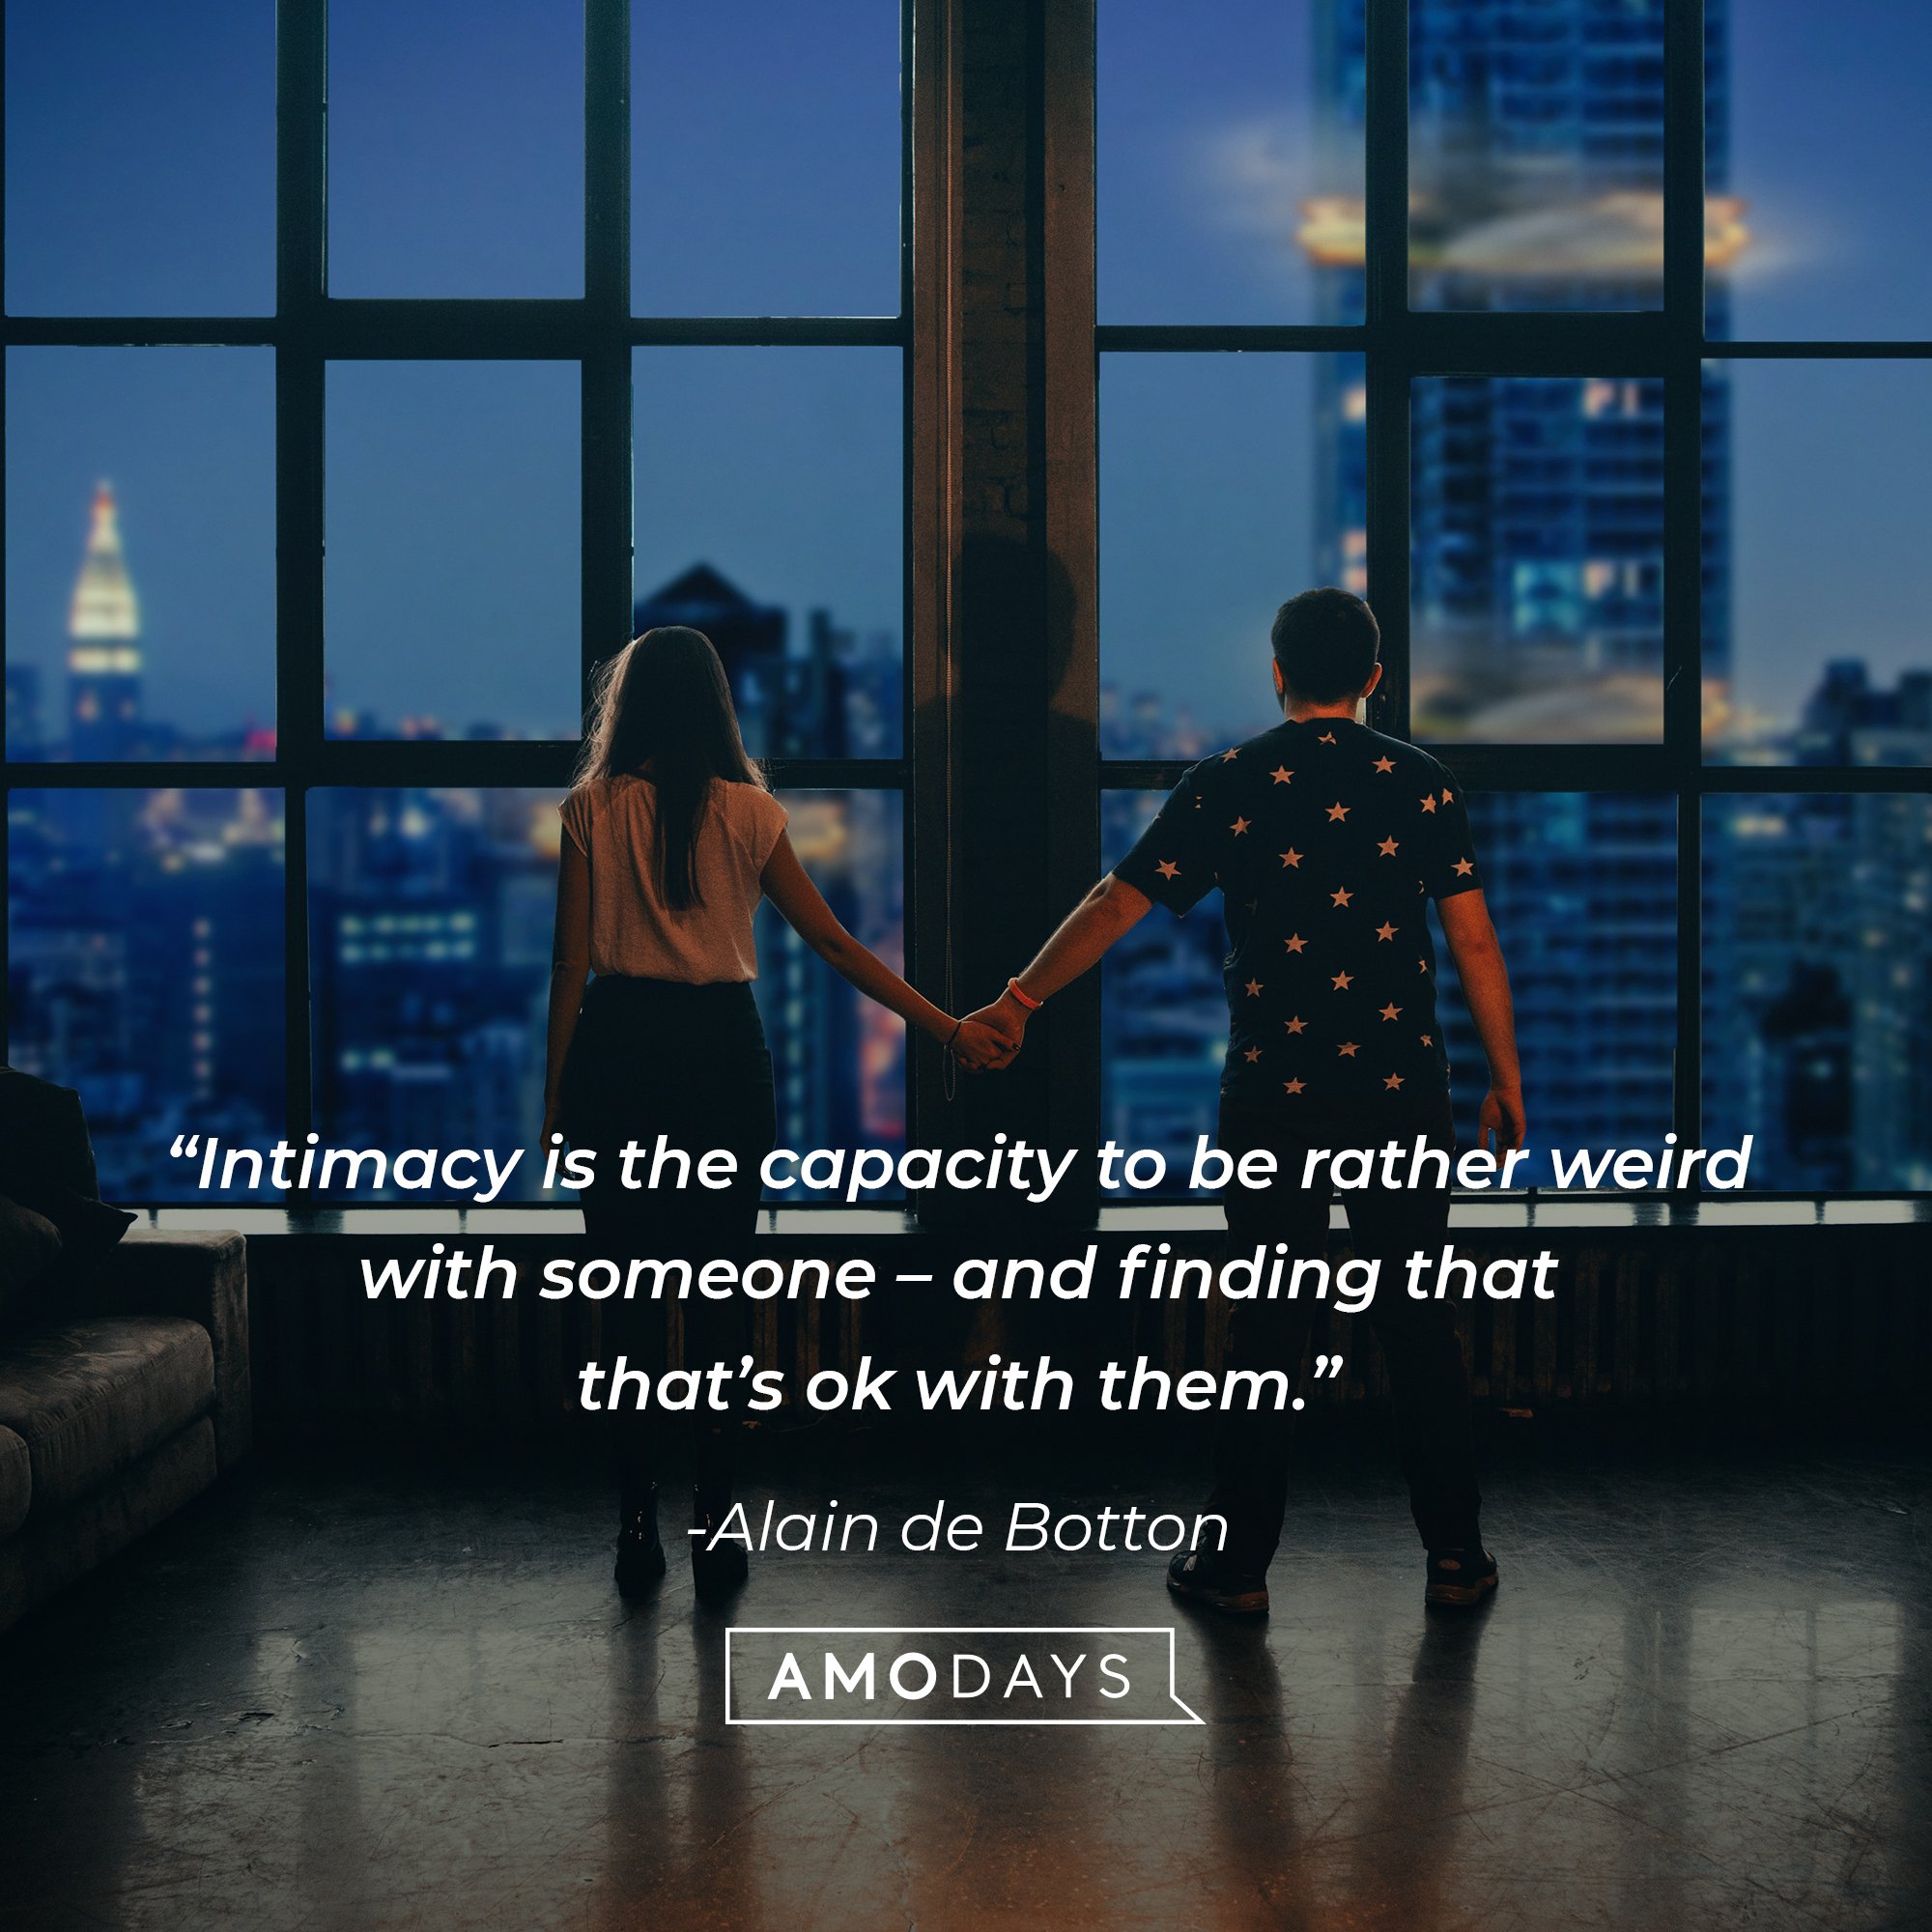 Alain de Botton's quote: “Intimacy is the capacity to be rather weird with someone - and finding that that's ok with them.” | Image: AmoDays